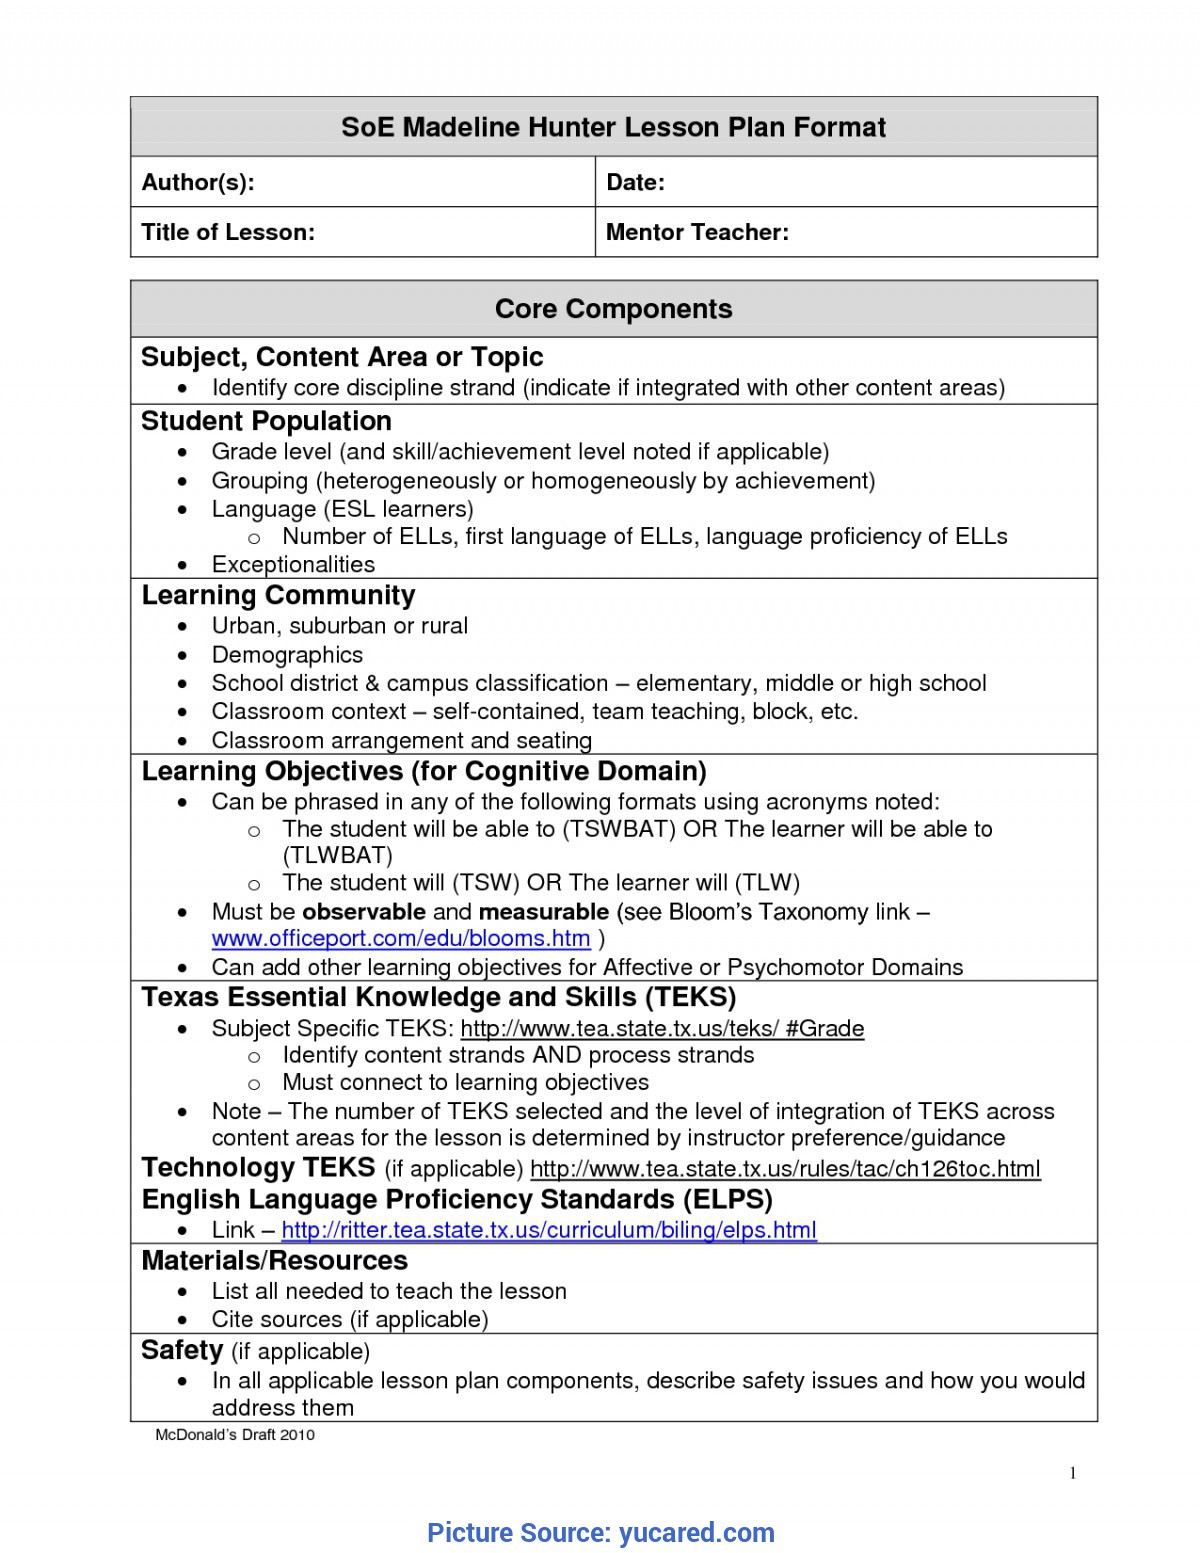 Madeline Hunter Lesson Plan Template Word | Articleezined Regarding Madeline Hunter Lesson Plan Template Word